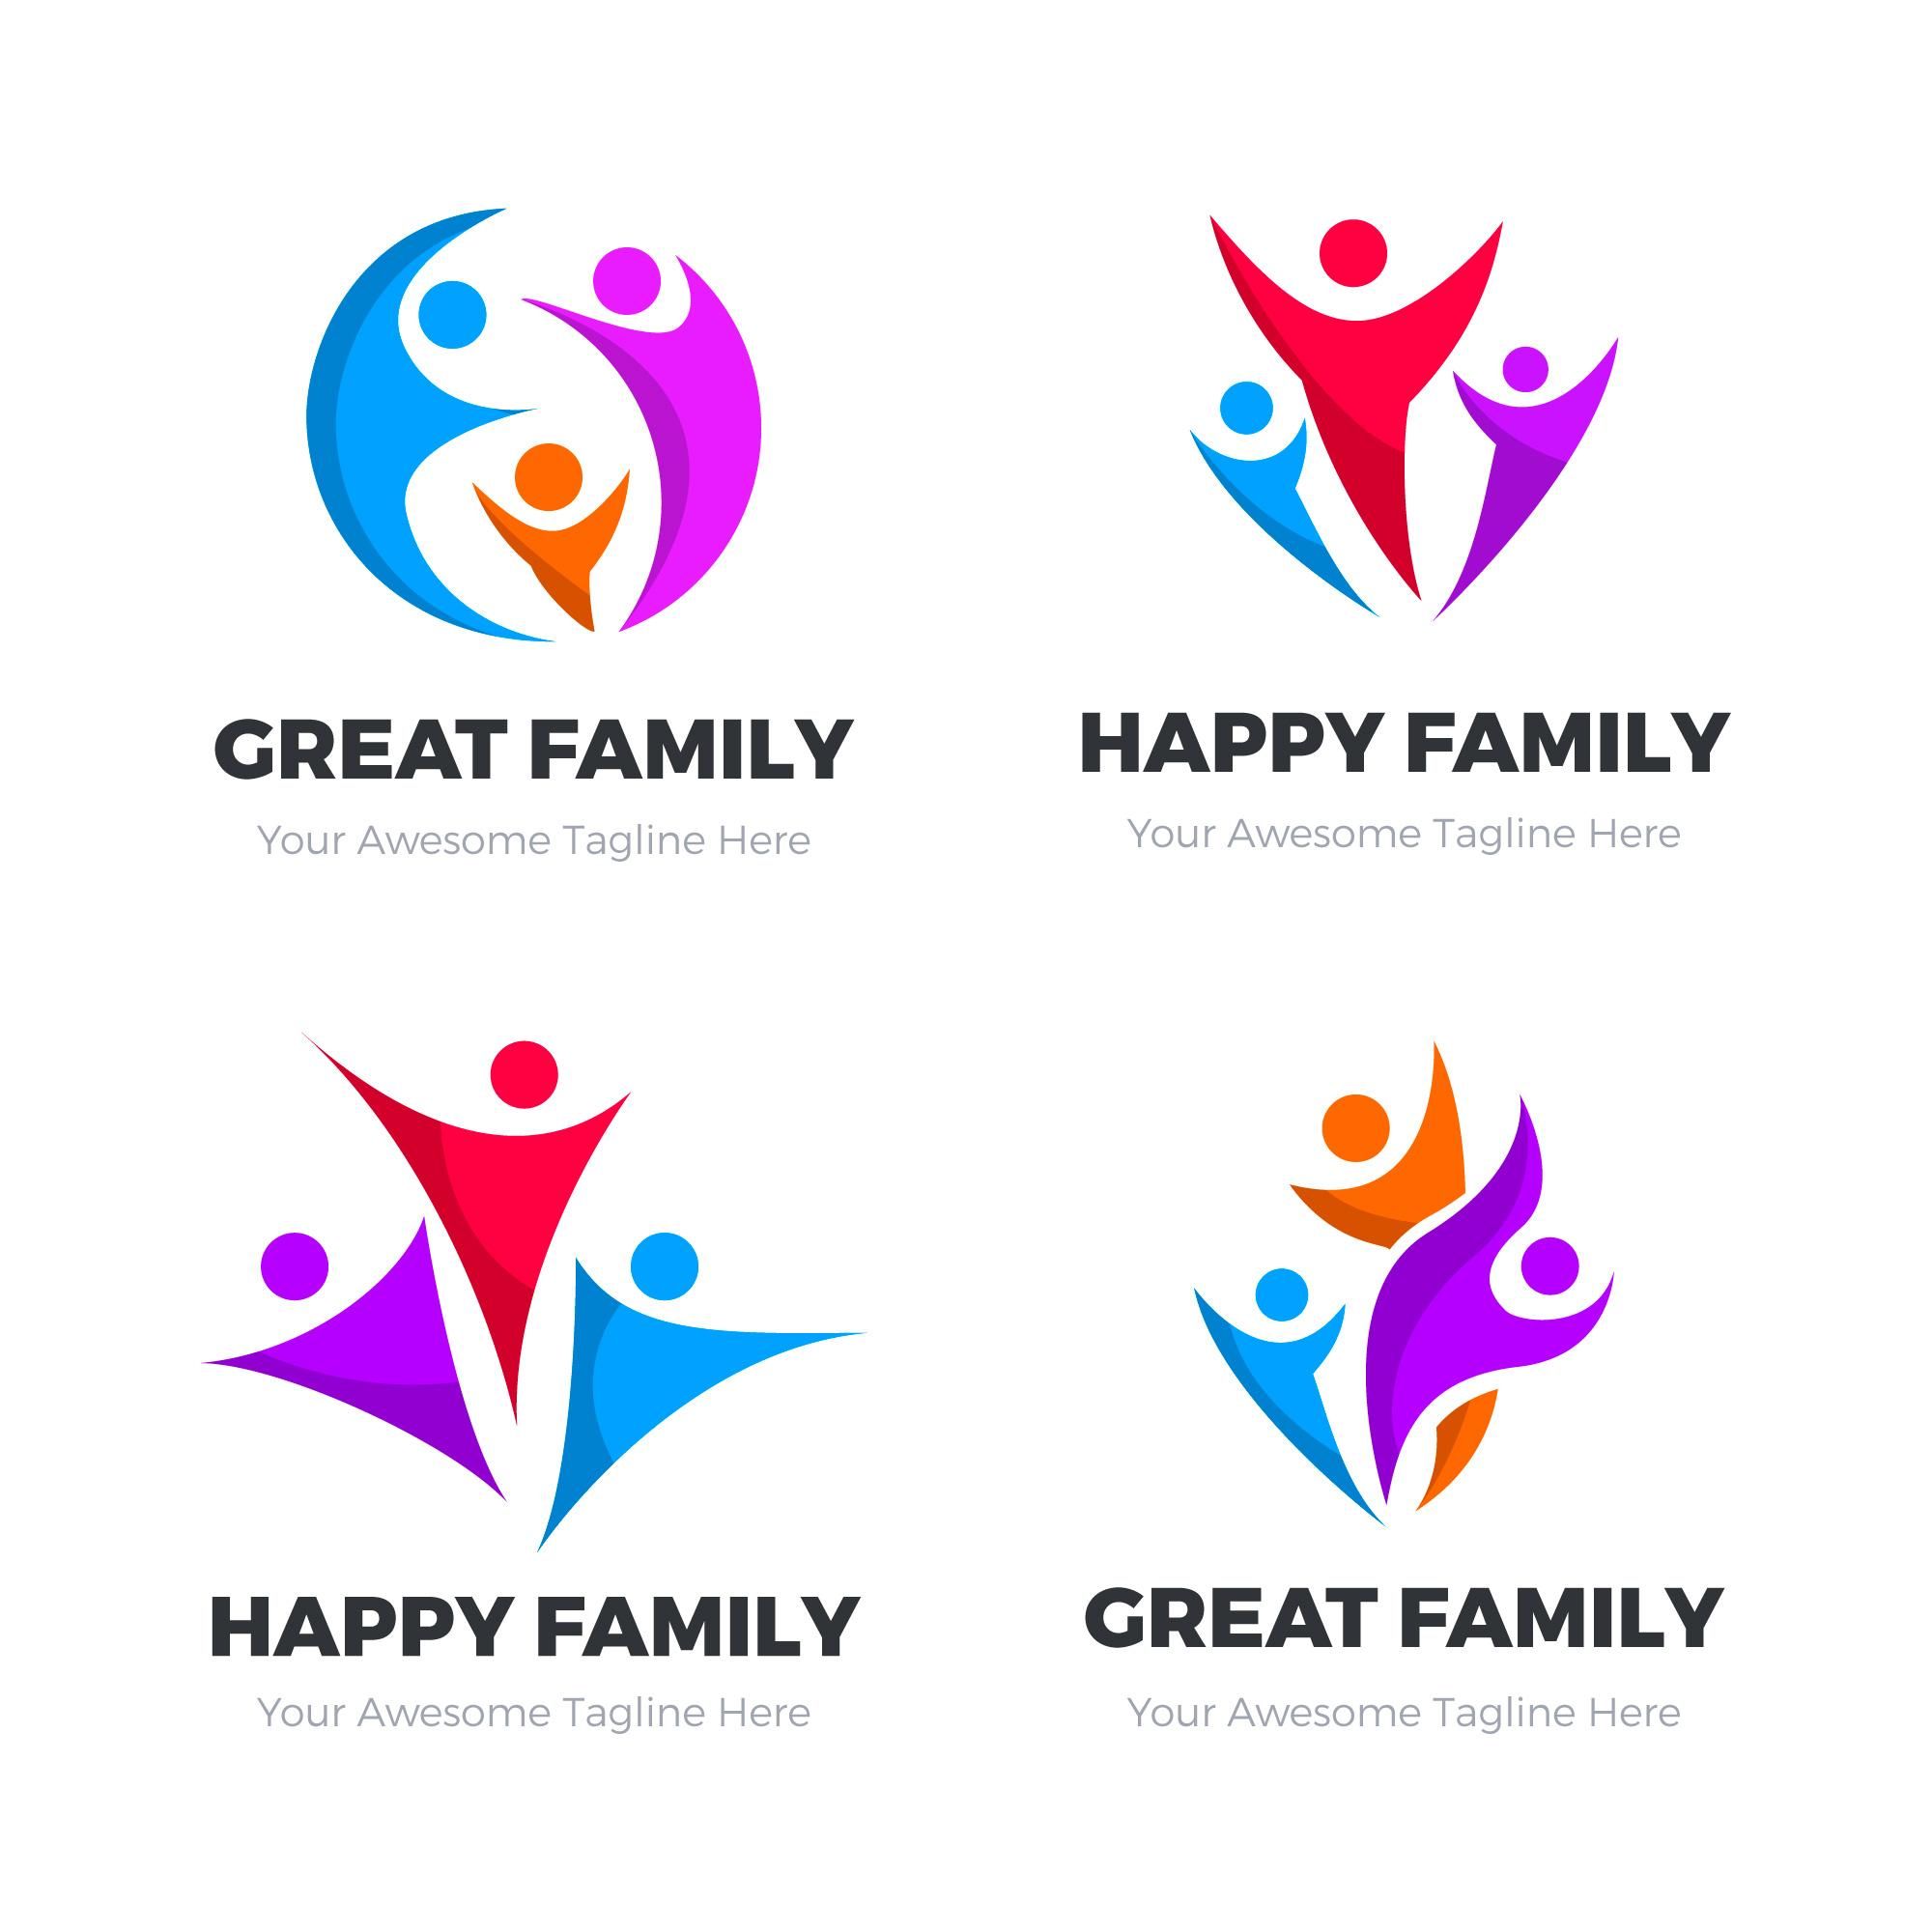 Family Logos Collections Pack of 4 Logos by Shurvirm | Codester